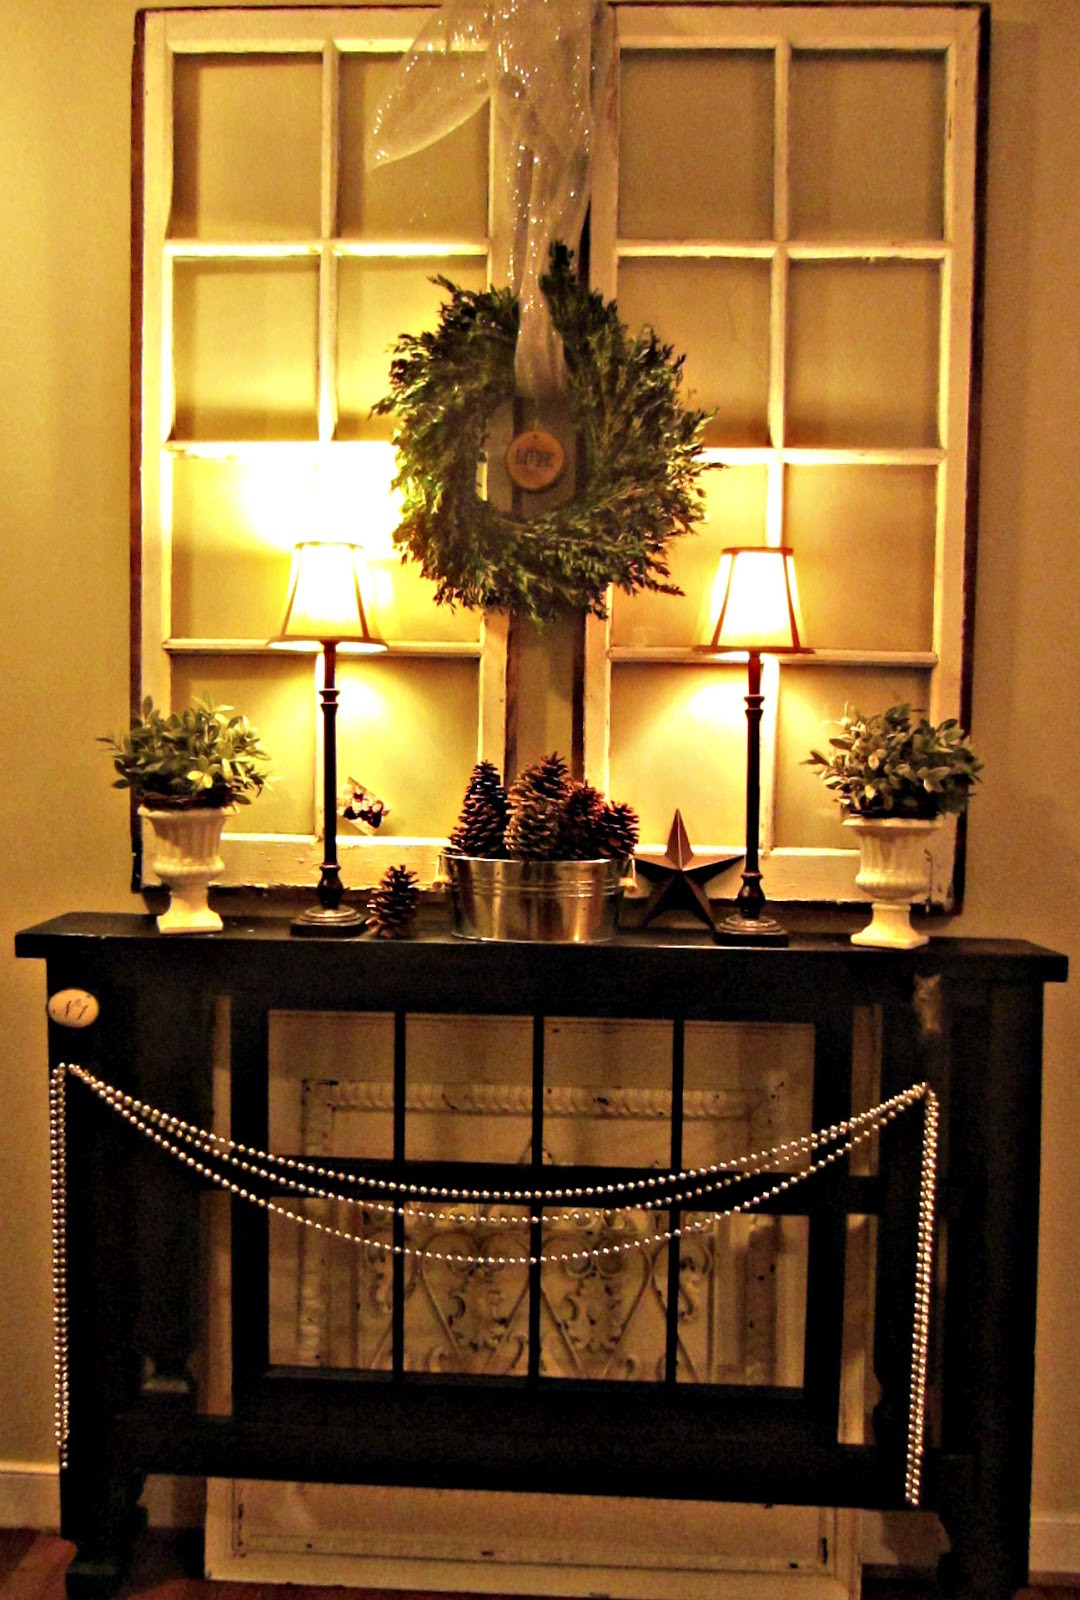 Christmas Entryway Decorating Ideas
 Down to Earth Style Foyer Christmas Mantel